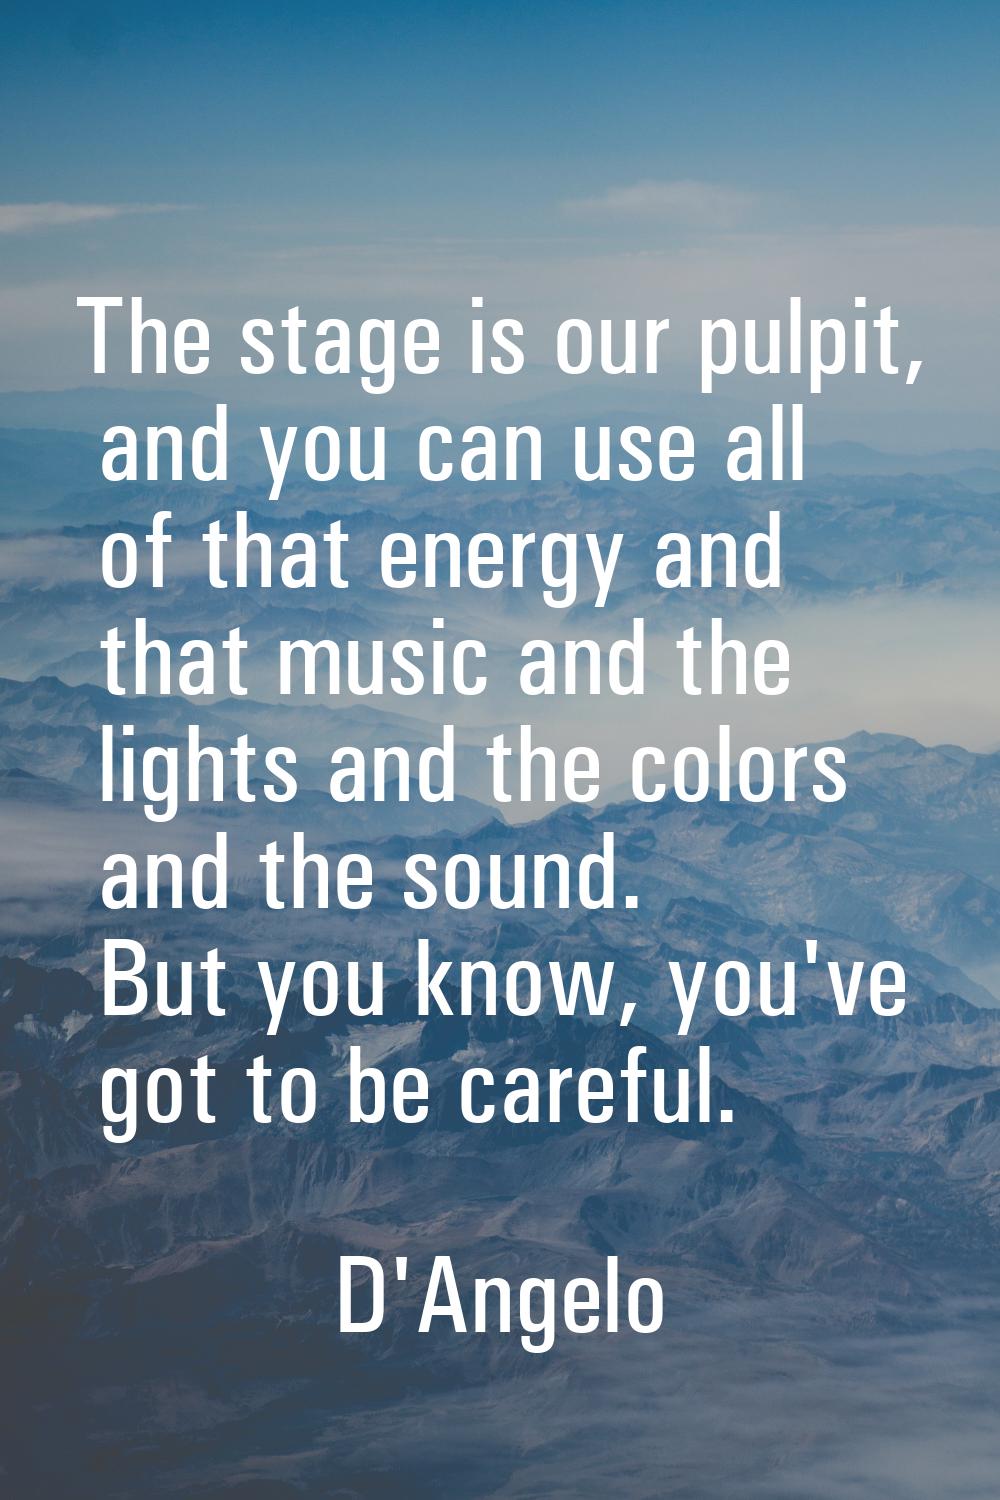 The stage is our pulpit, and you can use all of that energy and that music and the lights and the c